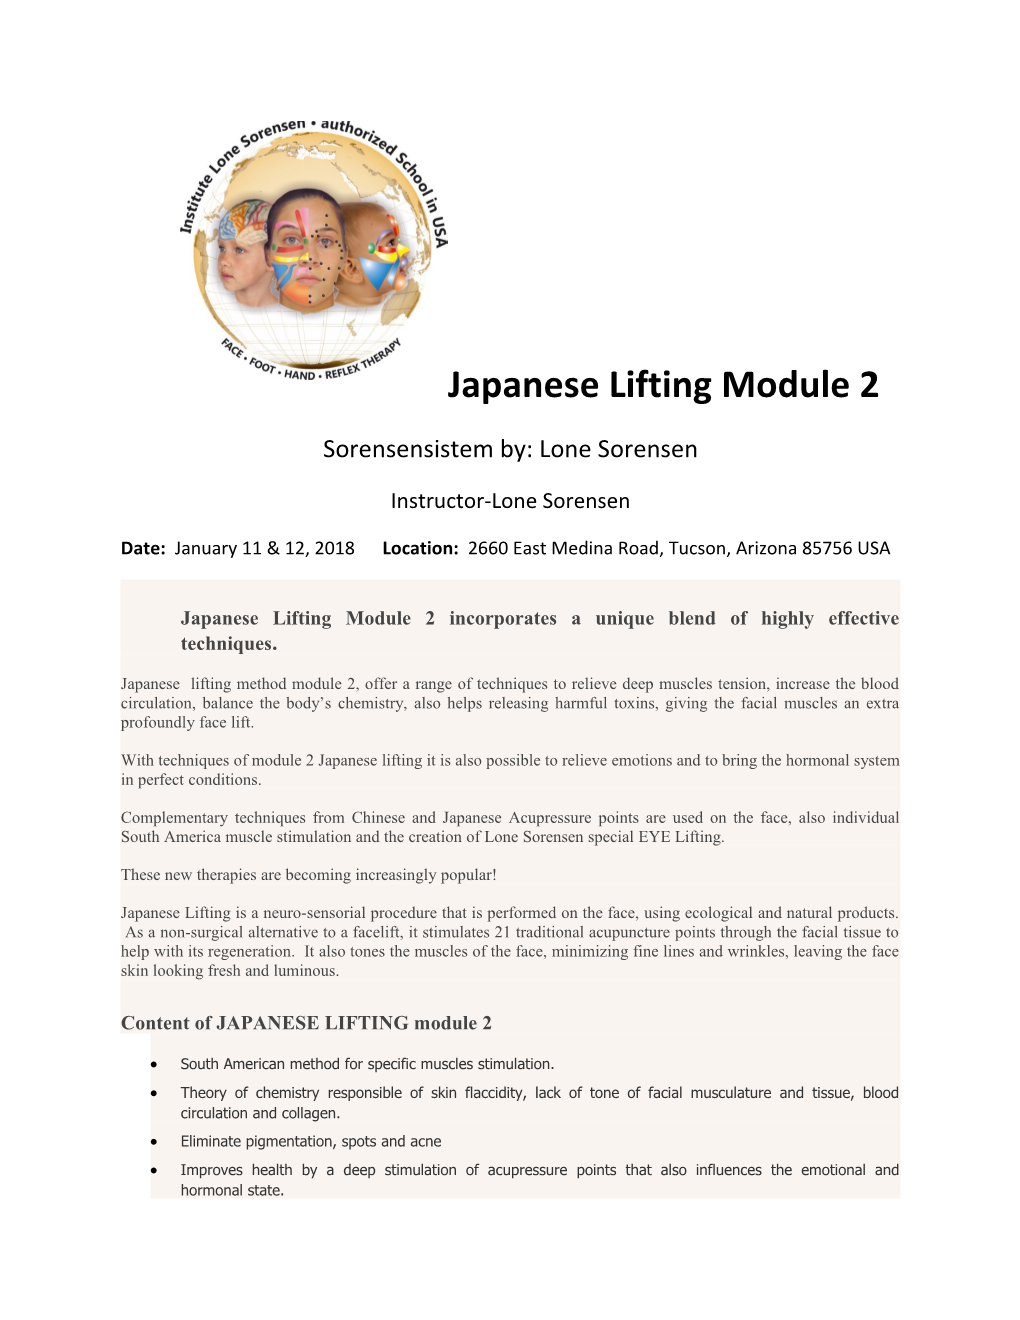 Japanese Lifting Module 2 Incorporates a Unique Blend of Highly Effective Techniques